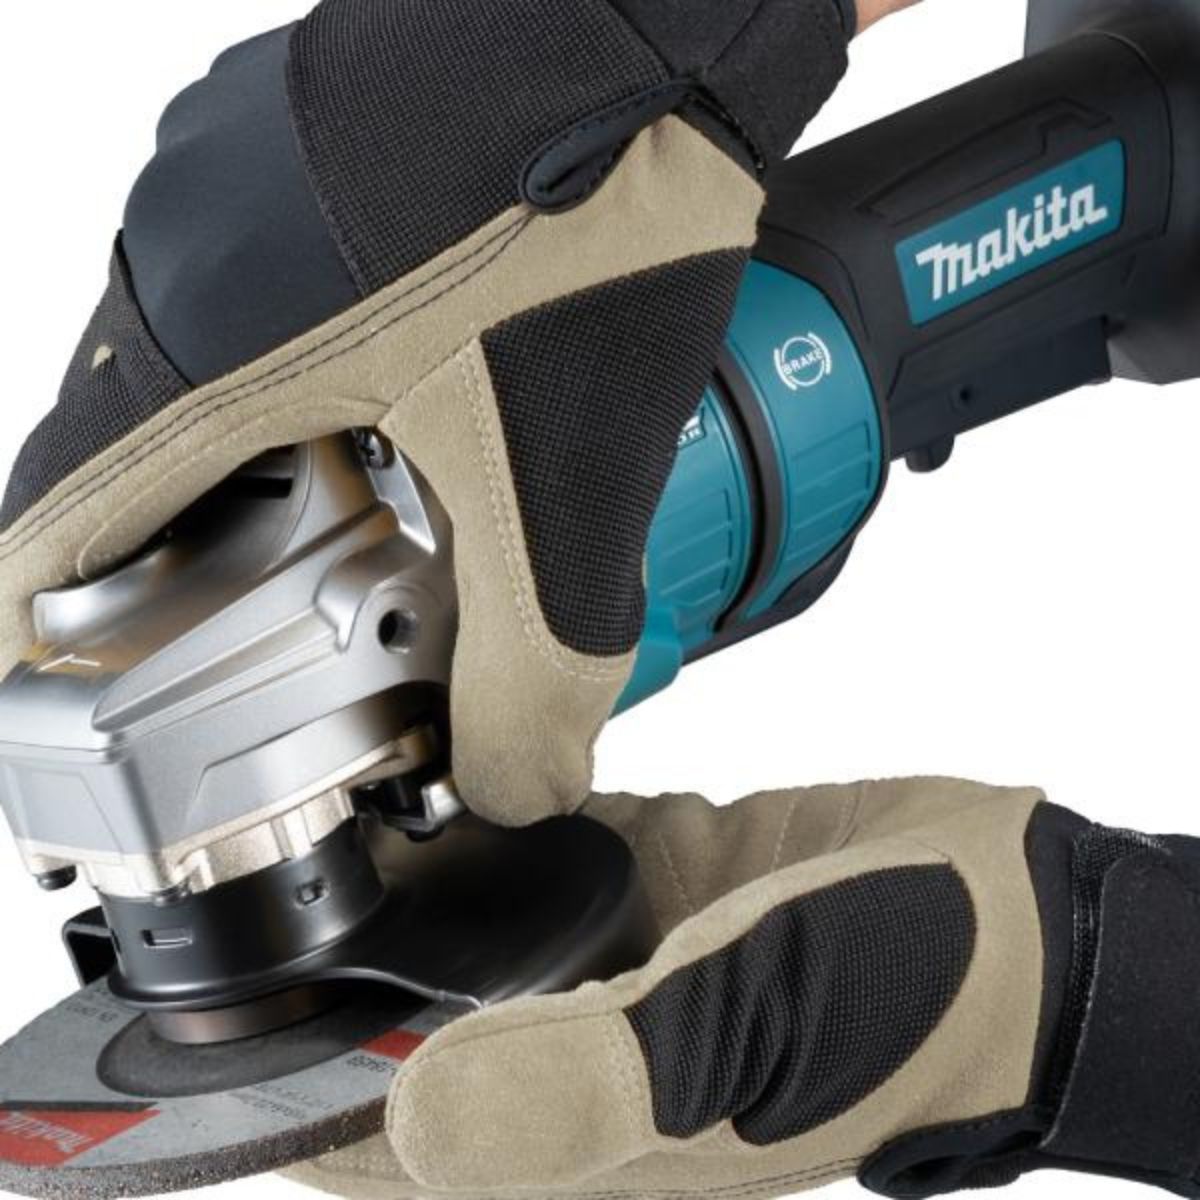 Makita GA049GZ01 40v XGT Max 115mm Brushless Angle Grinder Body Only With Carry Case